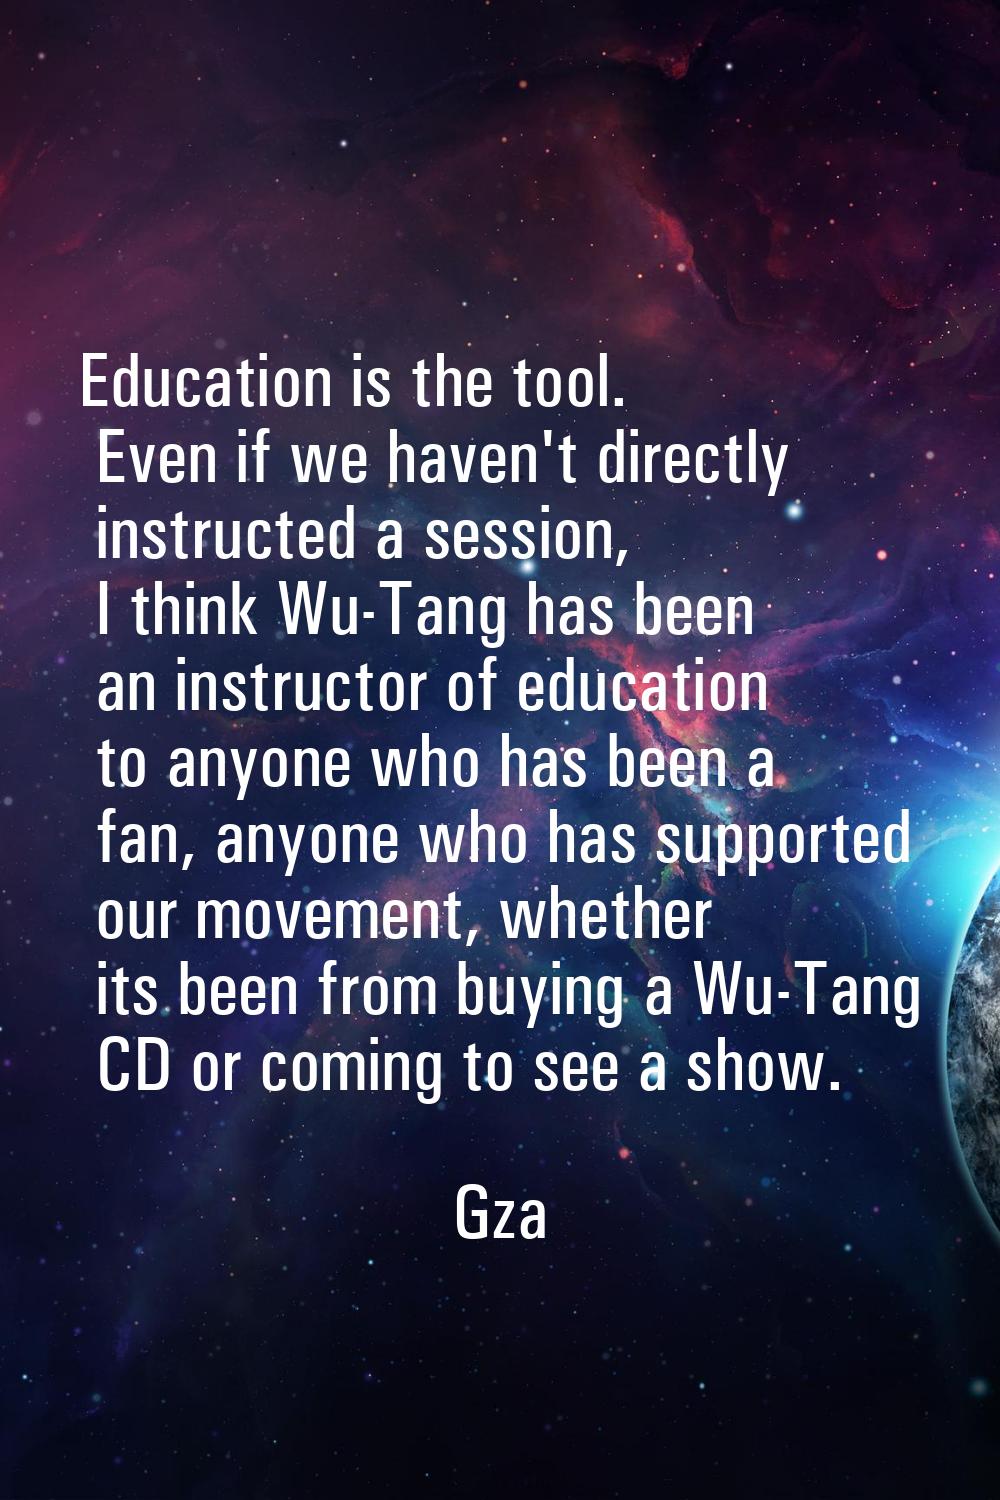 Education is the tool. Even if we haven't directly instructed a session, I think Wu-Tang has been a